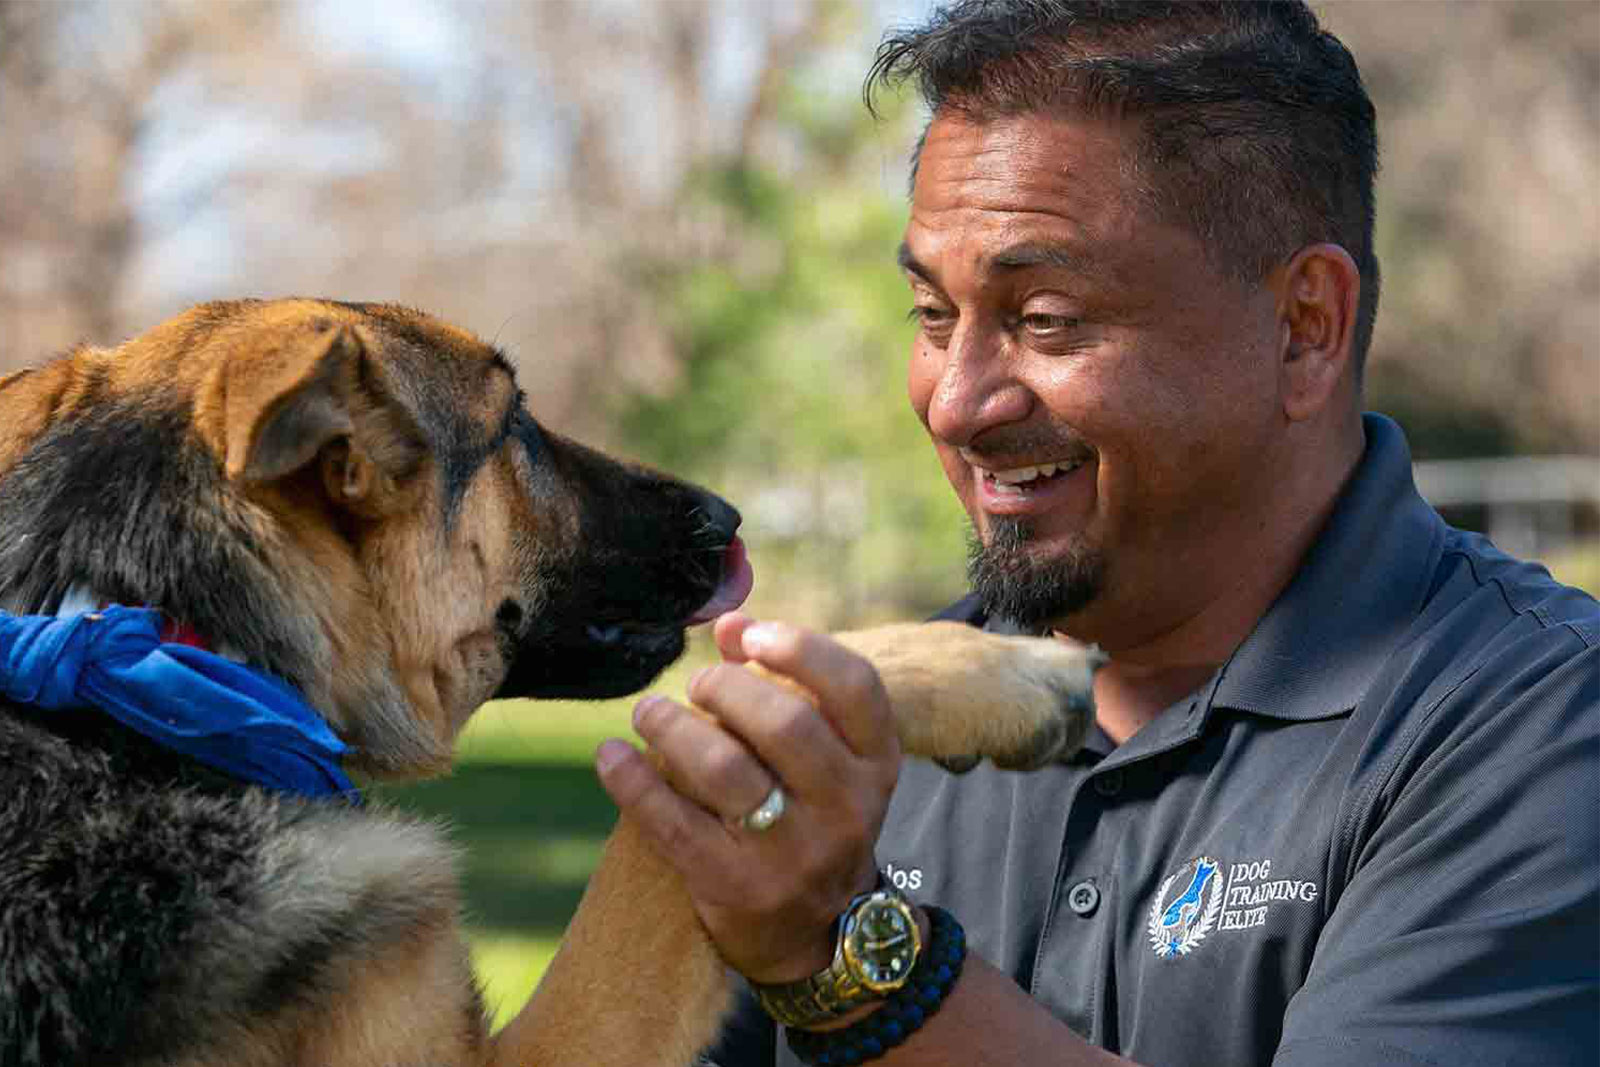 Dog Training Elite provides an affordable opportunity to work in the pet industry.